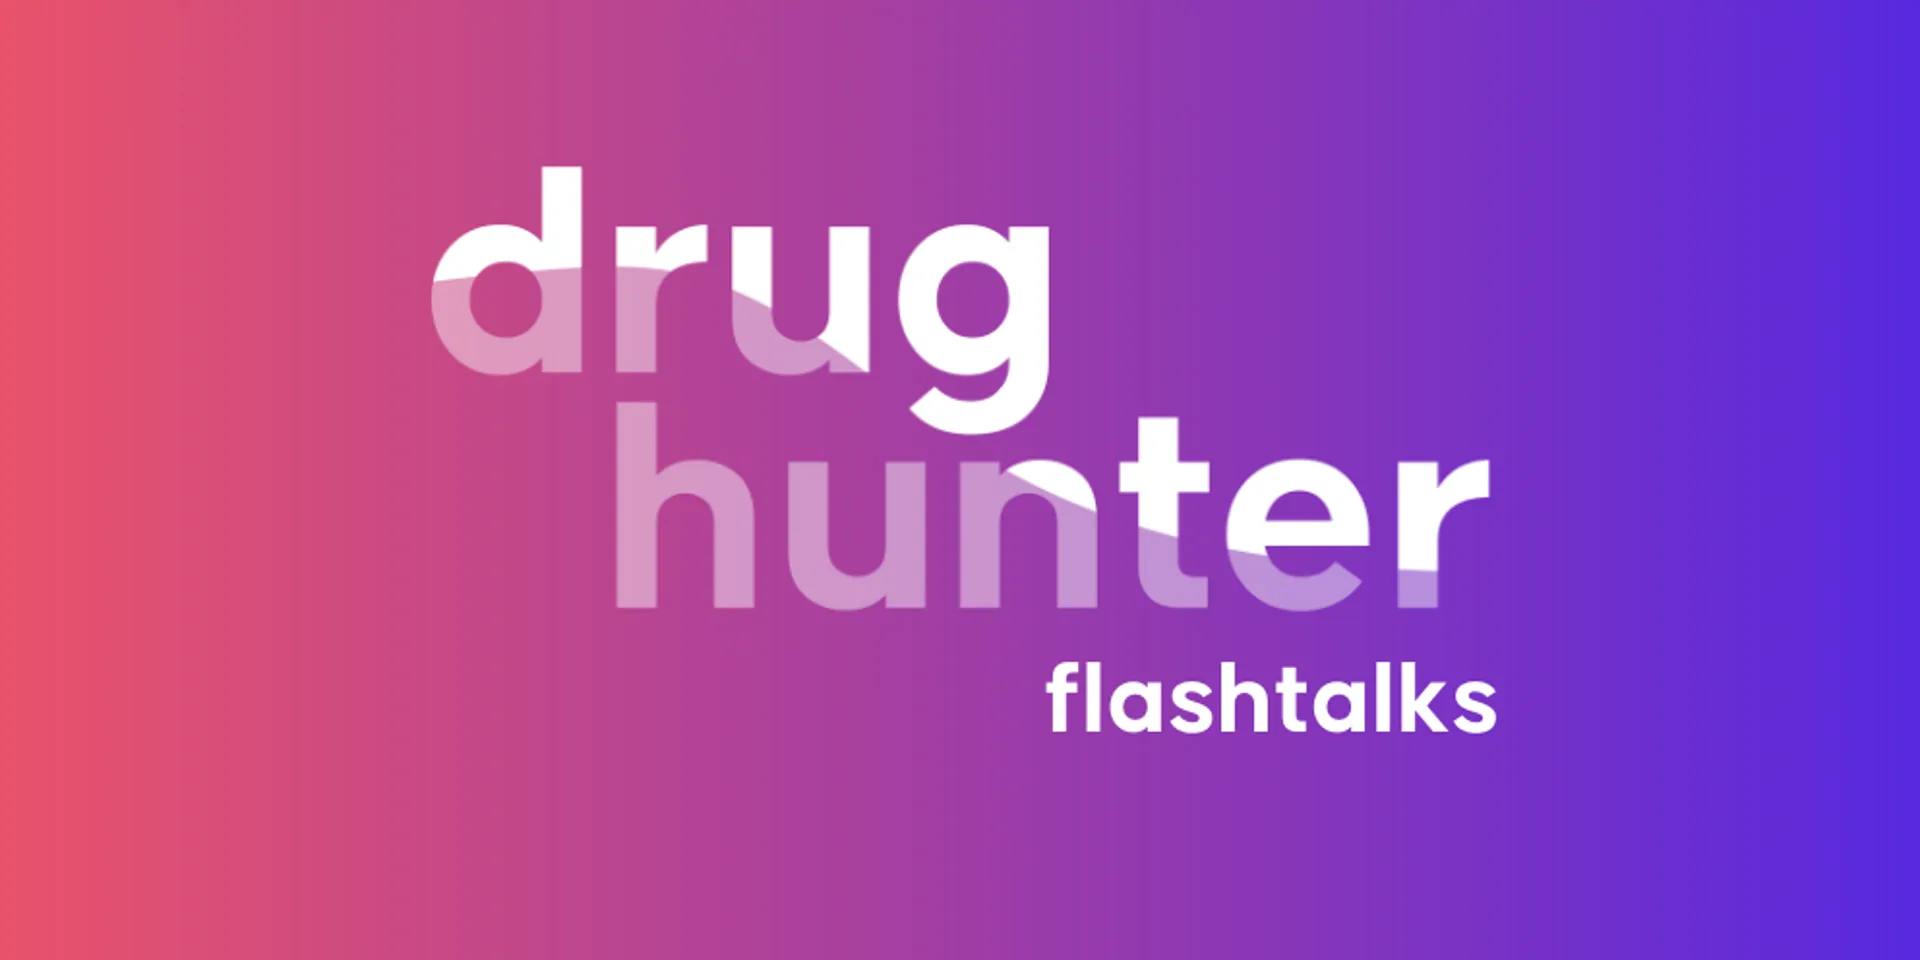 Pink-purple degradation background color with Drug Hunter Flash Talks letters in white